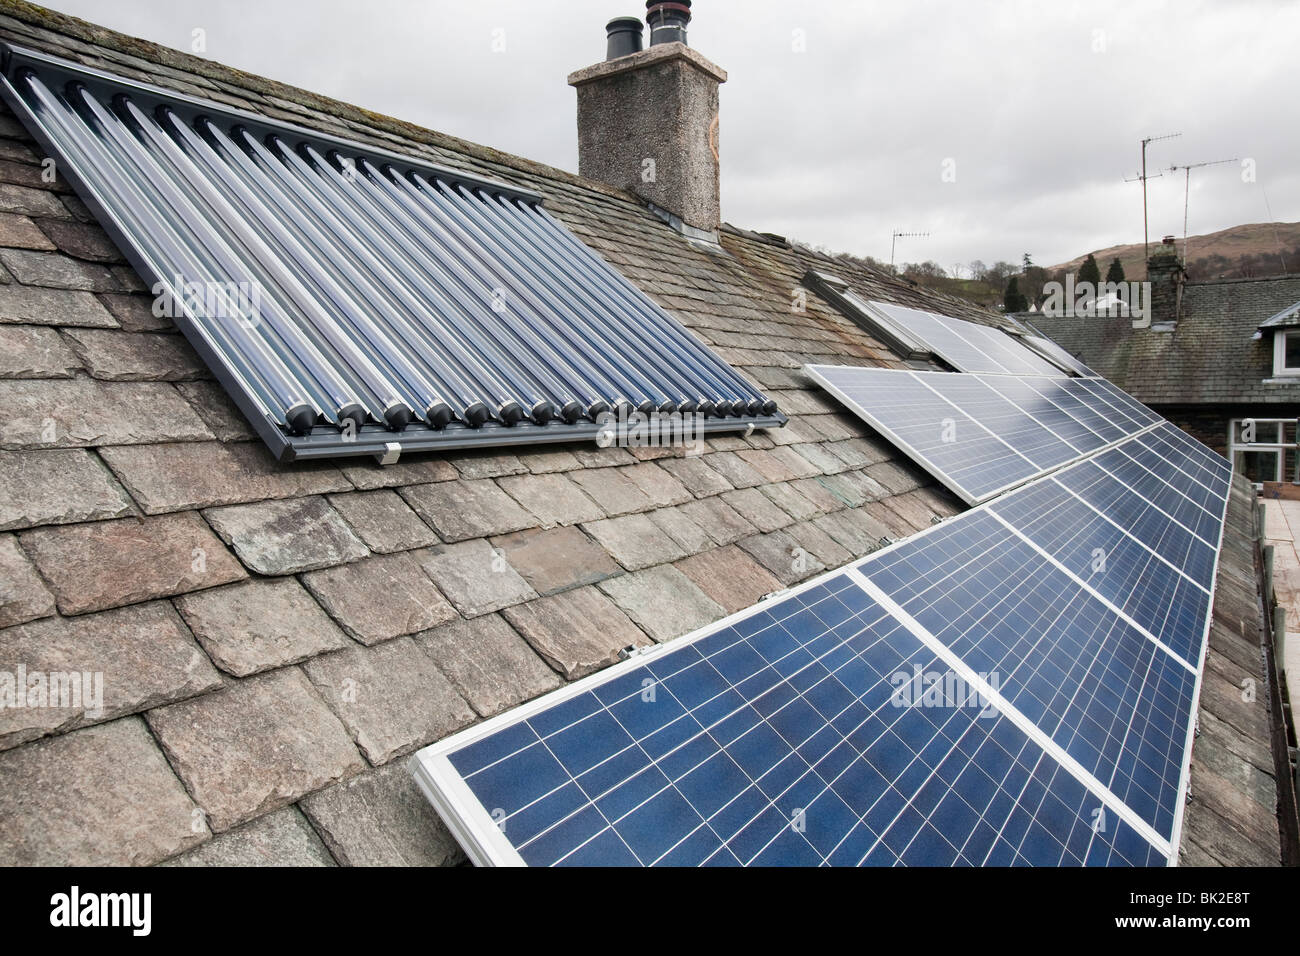 Solar voltaic electricity generating panels and solar hot water panels on a house roof in Ambleside, Cumbria, UK. Stock Photo